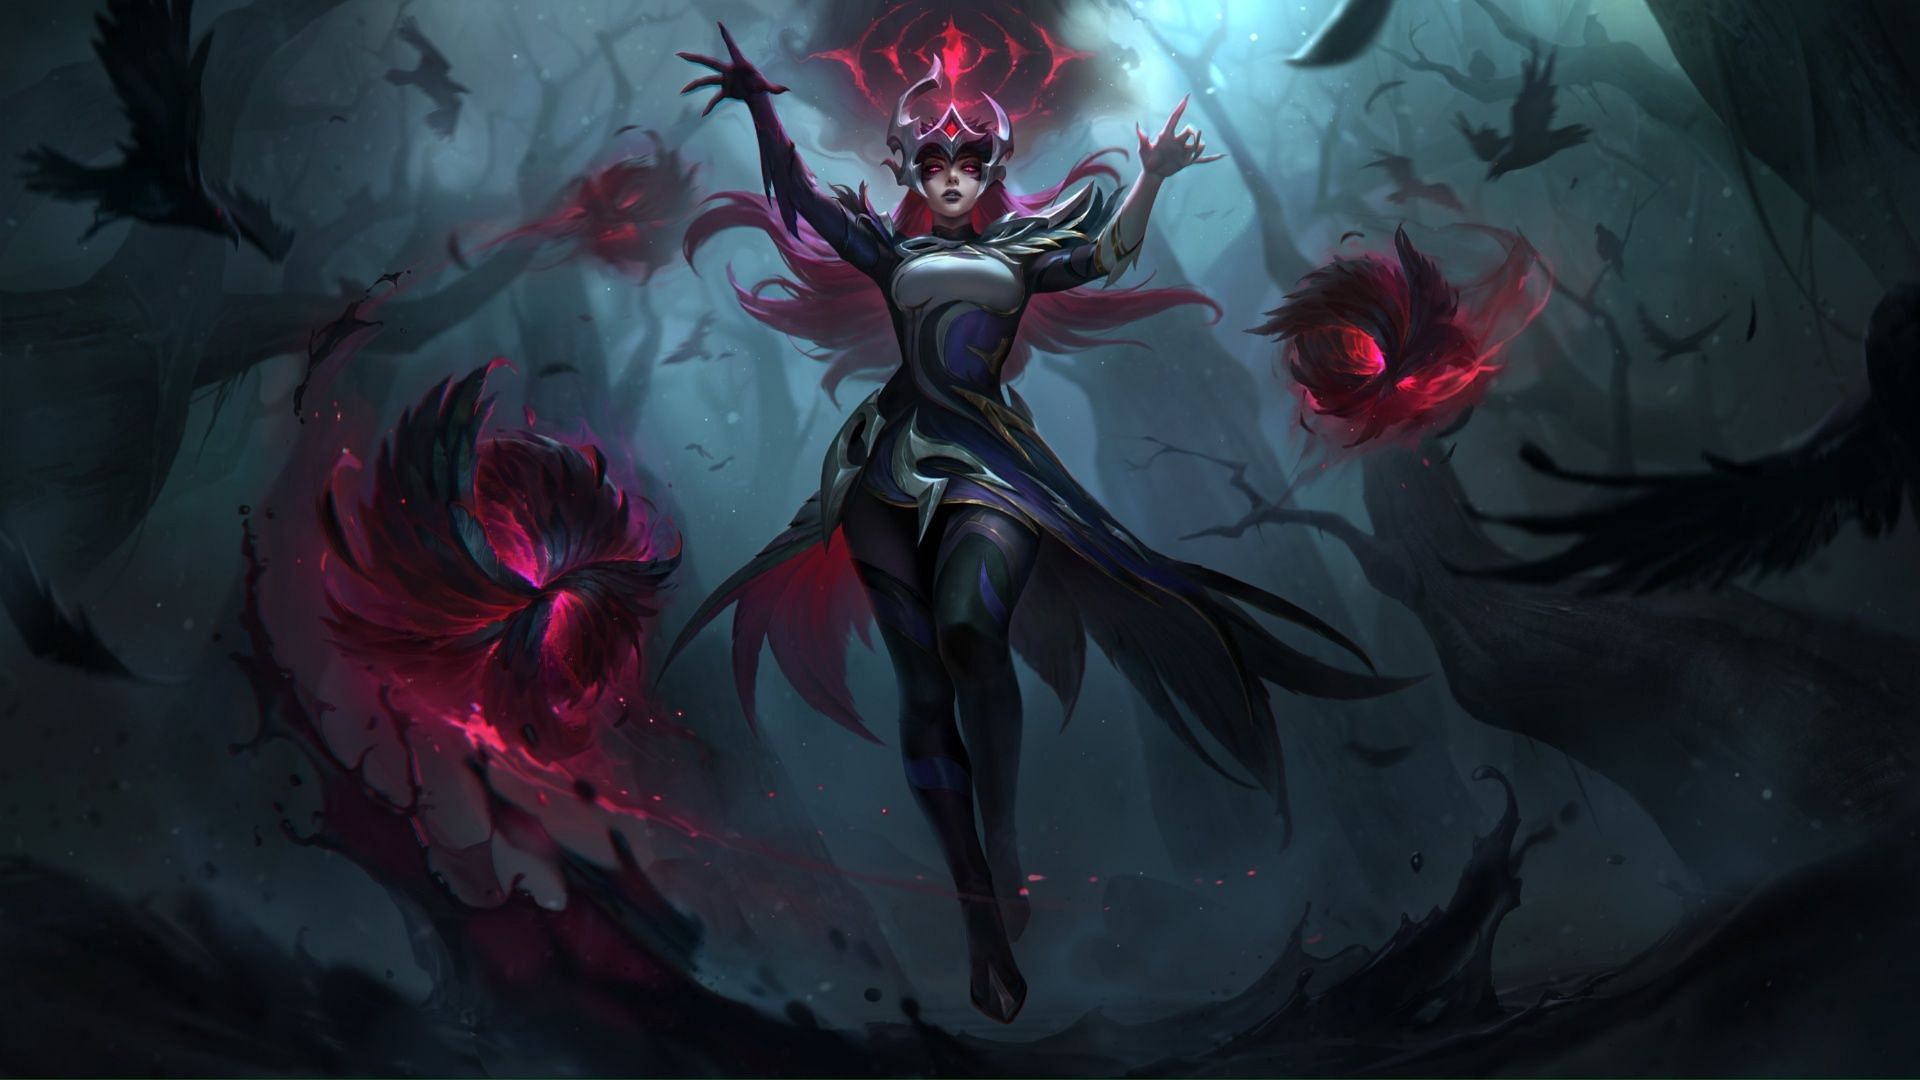 Coven Syndra (Image via Riot Games)